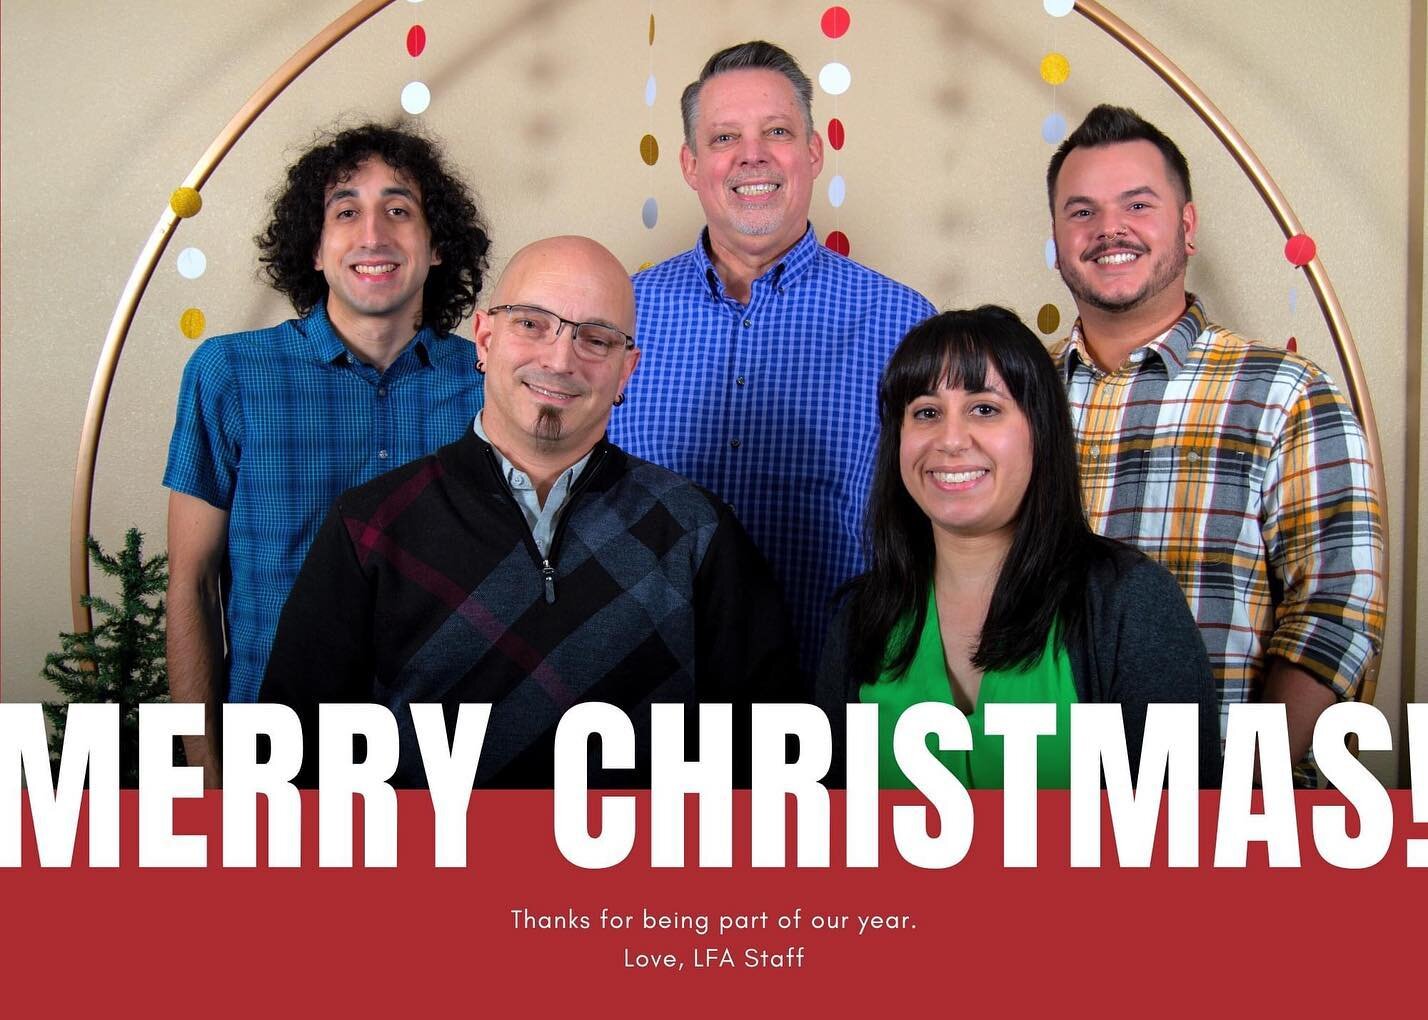 Merry Christmas to you from your LFA staff! #Christmas #churchfam #squad #squadgoals